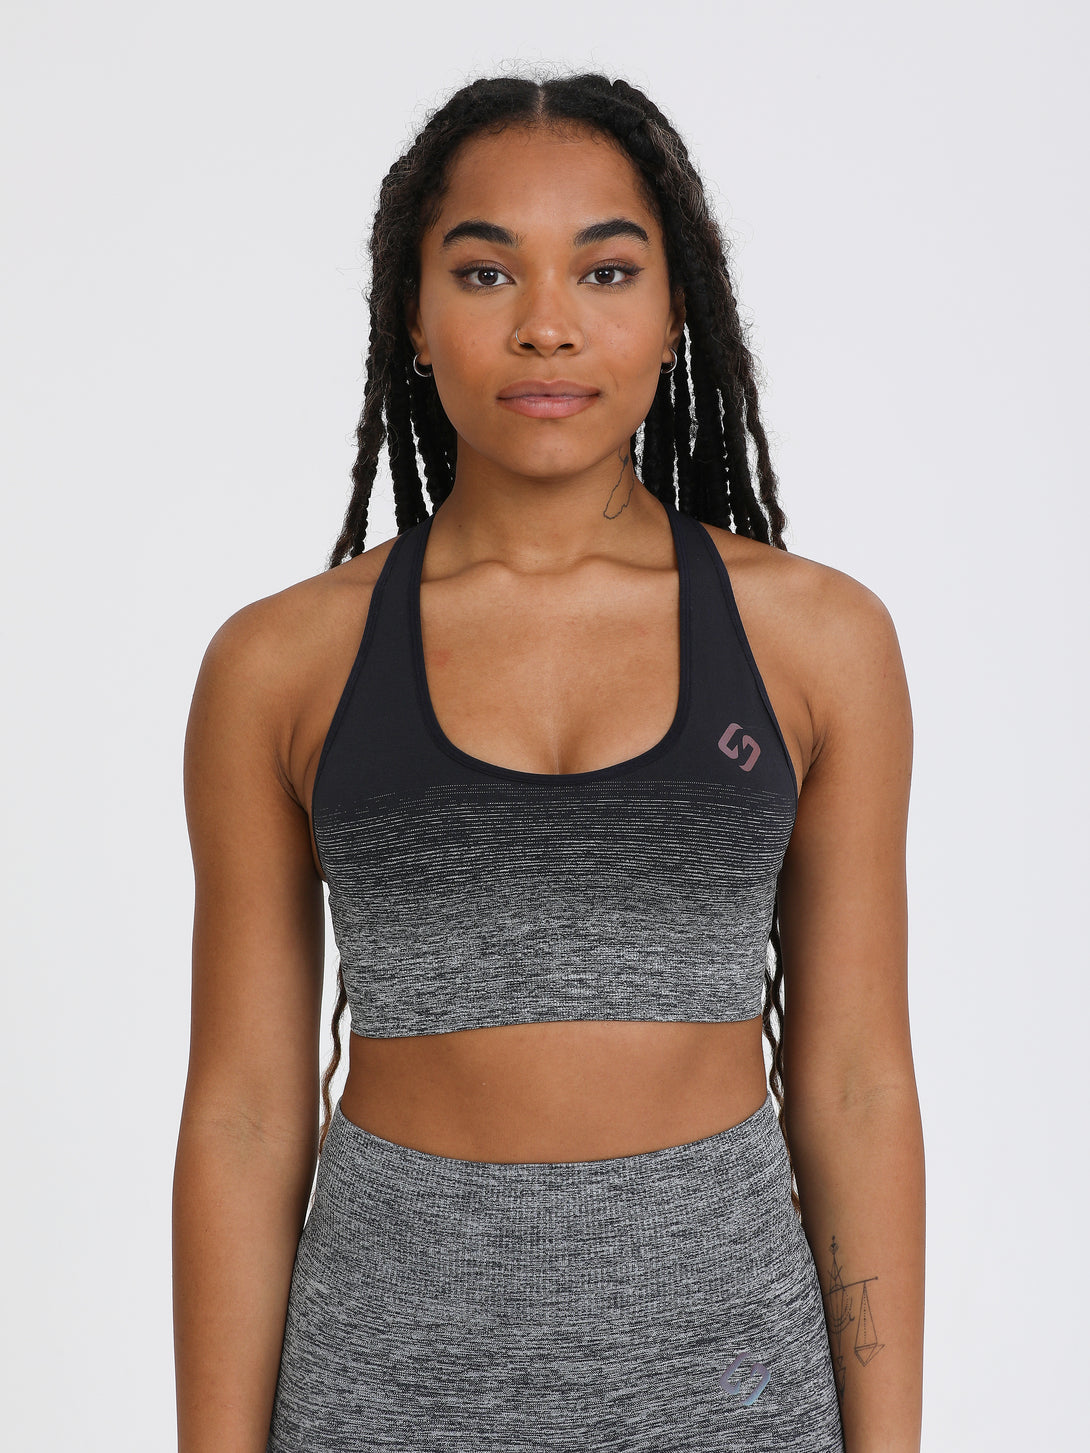 A woman wearing black color Seamless Ombre Medium Support Sports Bra